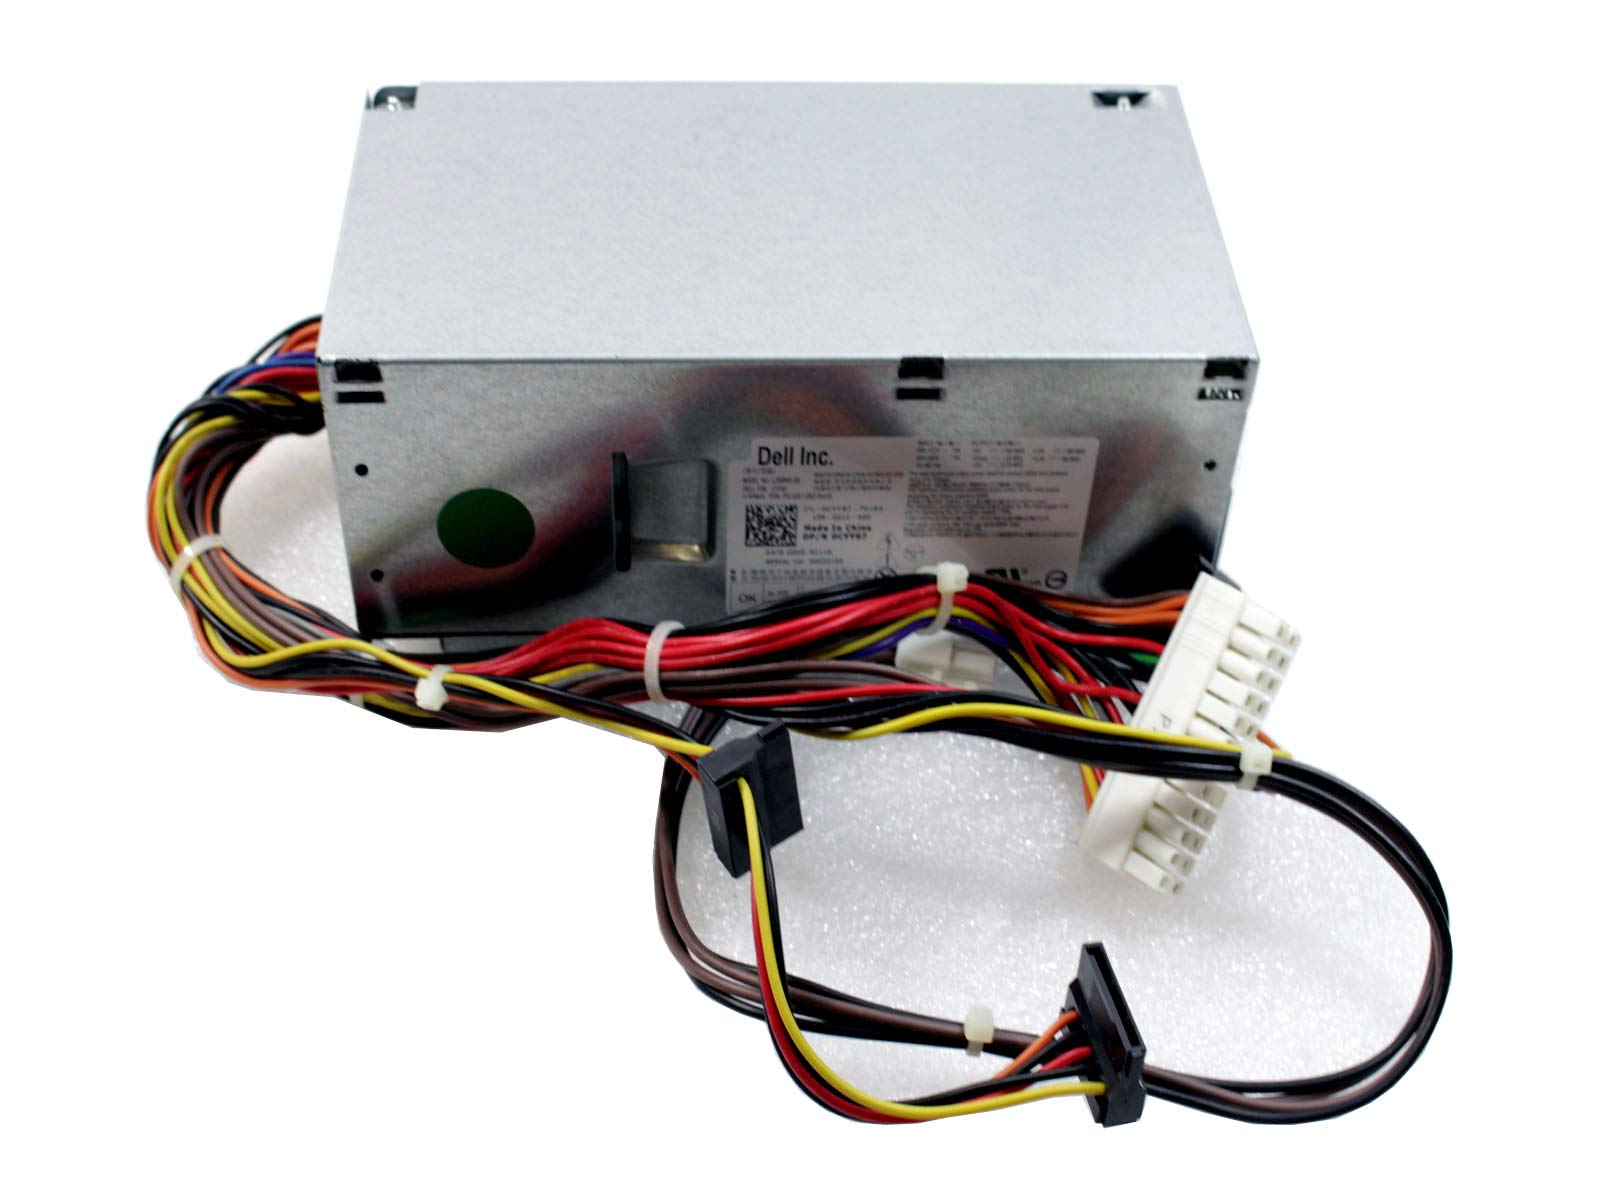 Genuine Dell 250W Watt CYY97 7GC81 L250NS-00 Power Supply Unit PSU For Inspiron 530s 620s Vostro 200s 220s, Optiplex 390, 790, 990 Desktop DT Systems Compatible Part Numbers: CYY97, 7GC81, 6MVJH, YJ1JT, 3MV8H Compatible Model Numbers: L250NS-00, D250